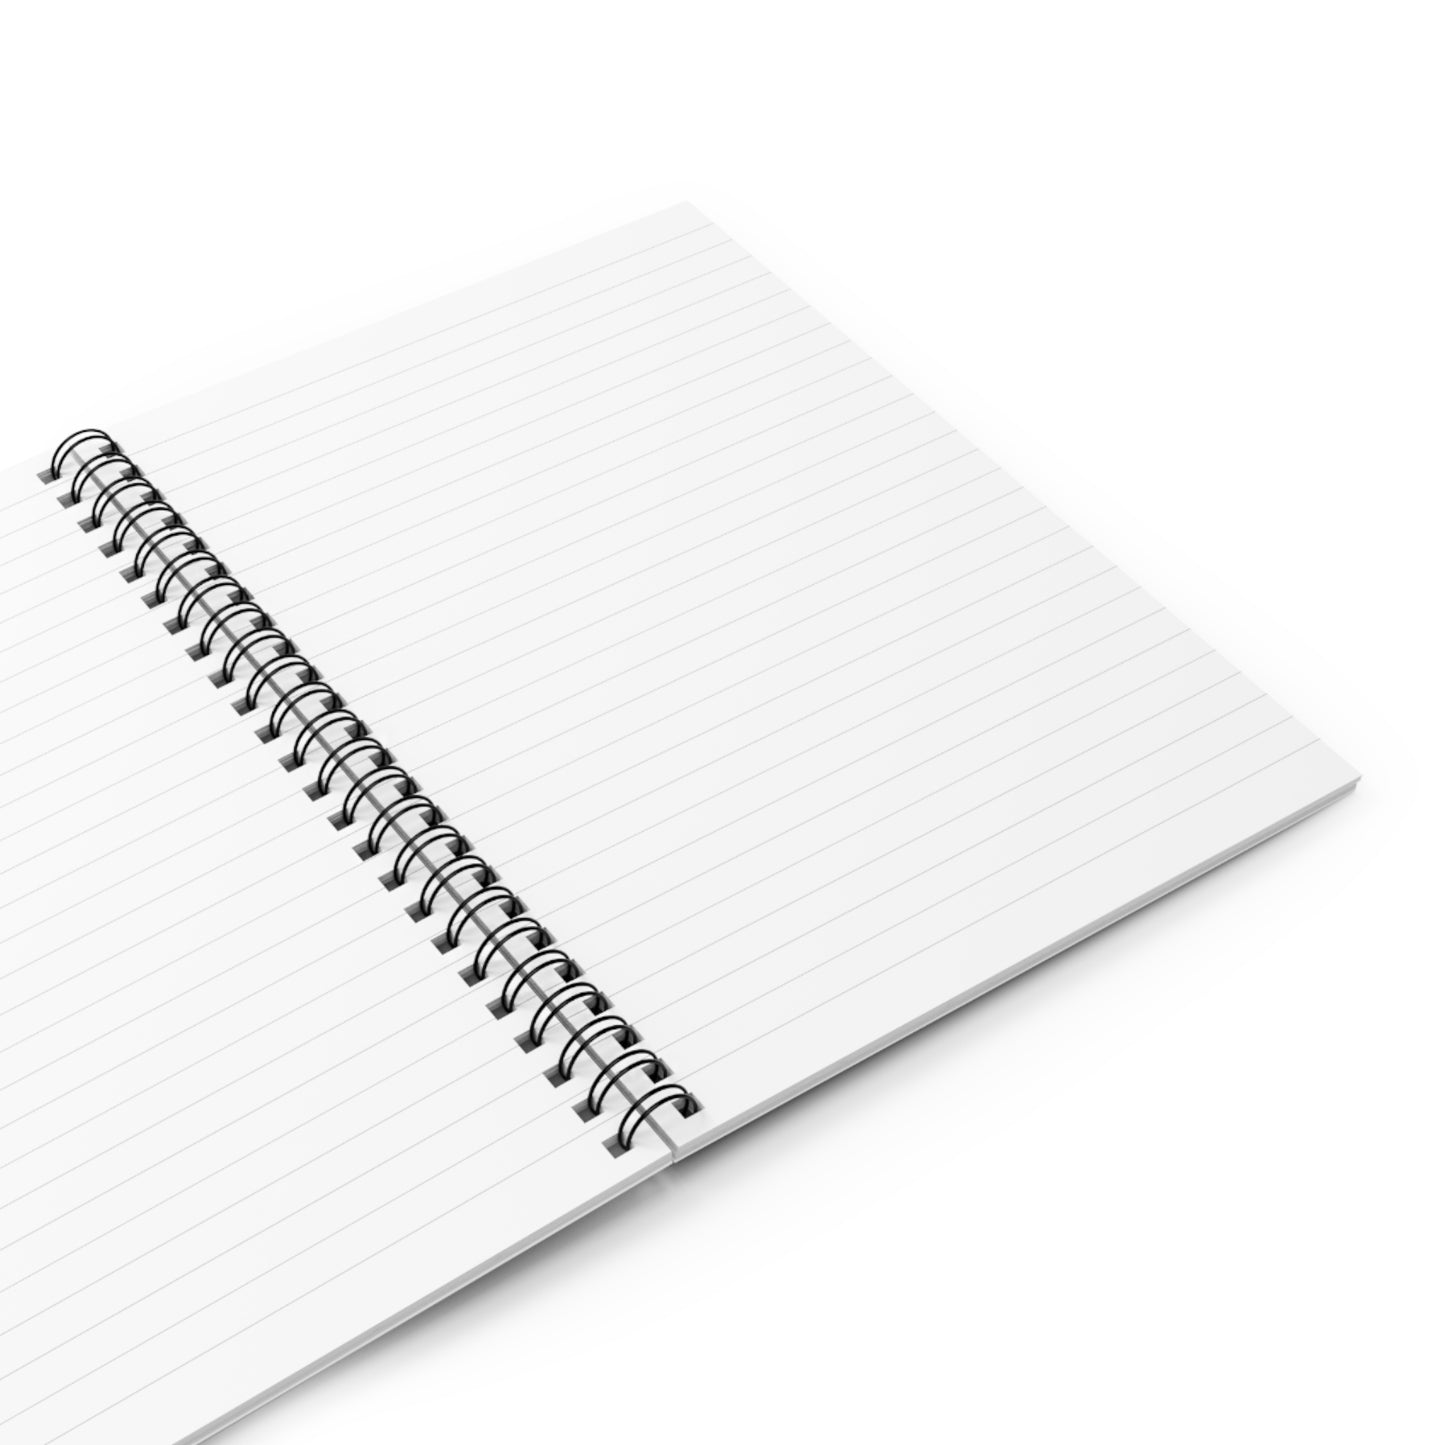 #LakeLife Spiral Notebook - Ruled Line